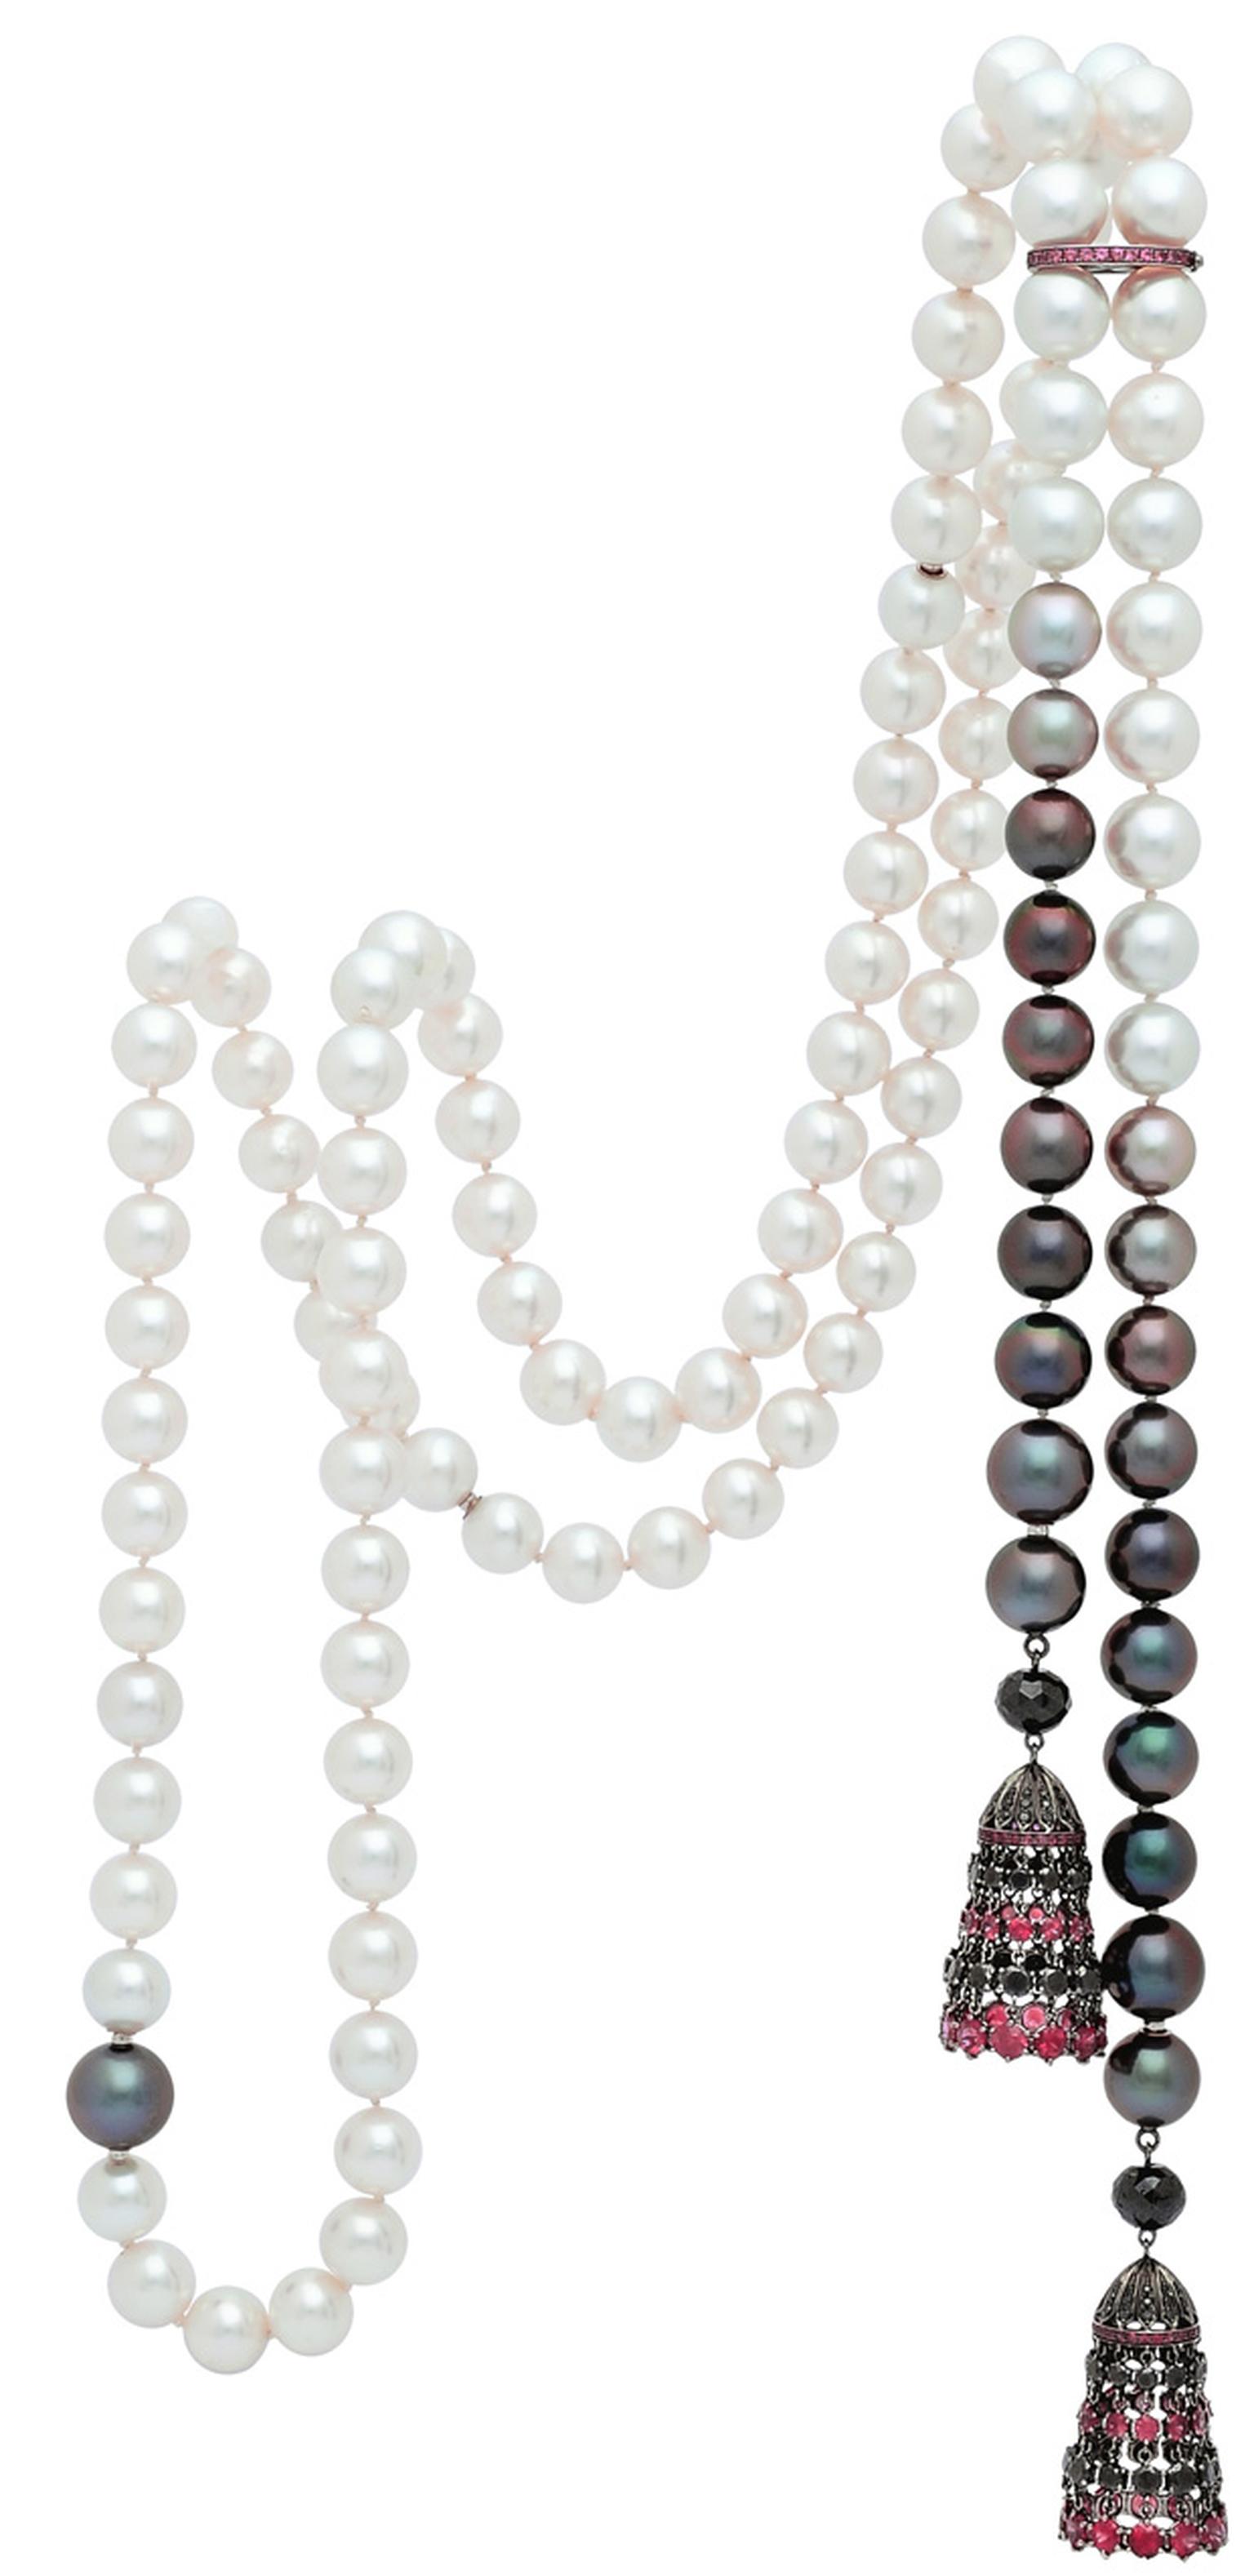 South Sea pearl necklace by Autore